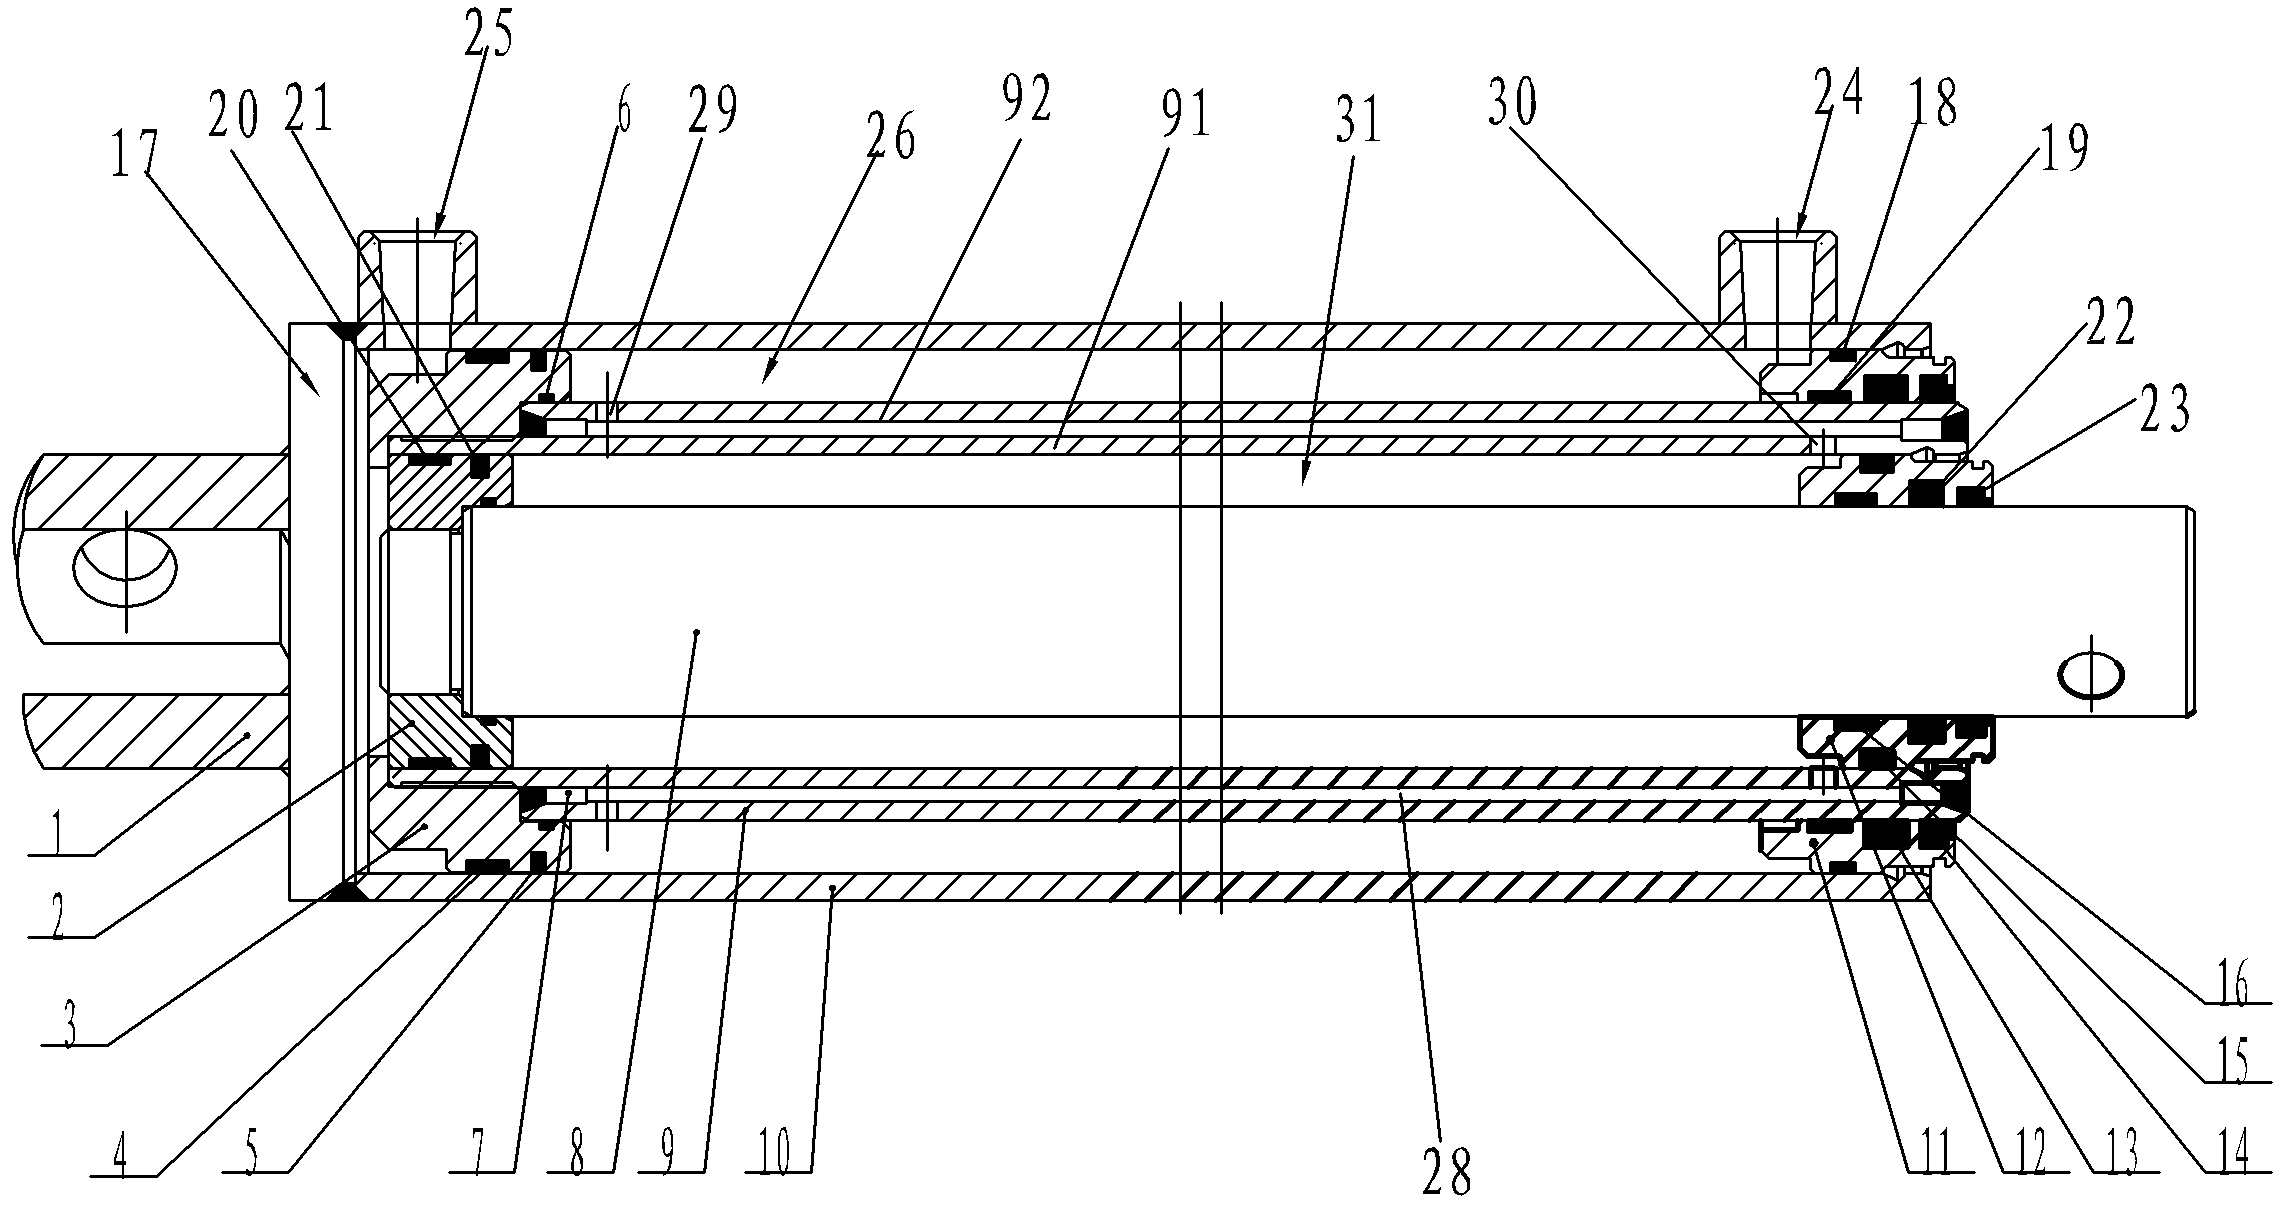 Secondary oil cylinder of wood splitting machine